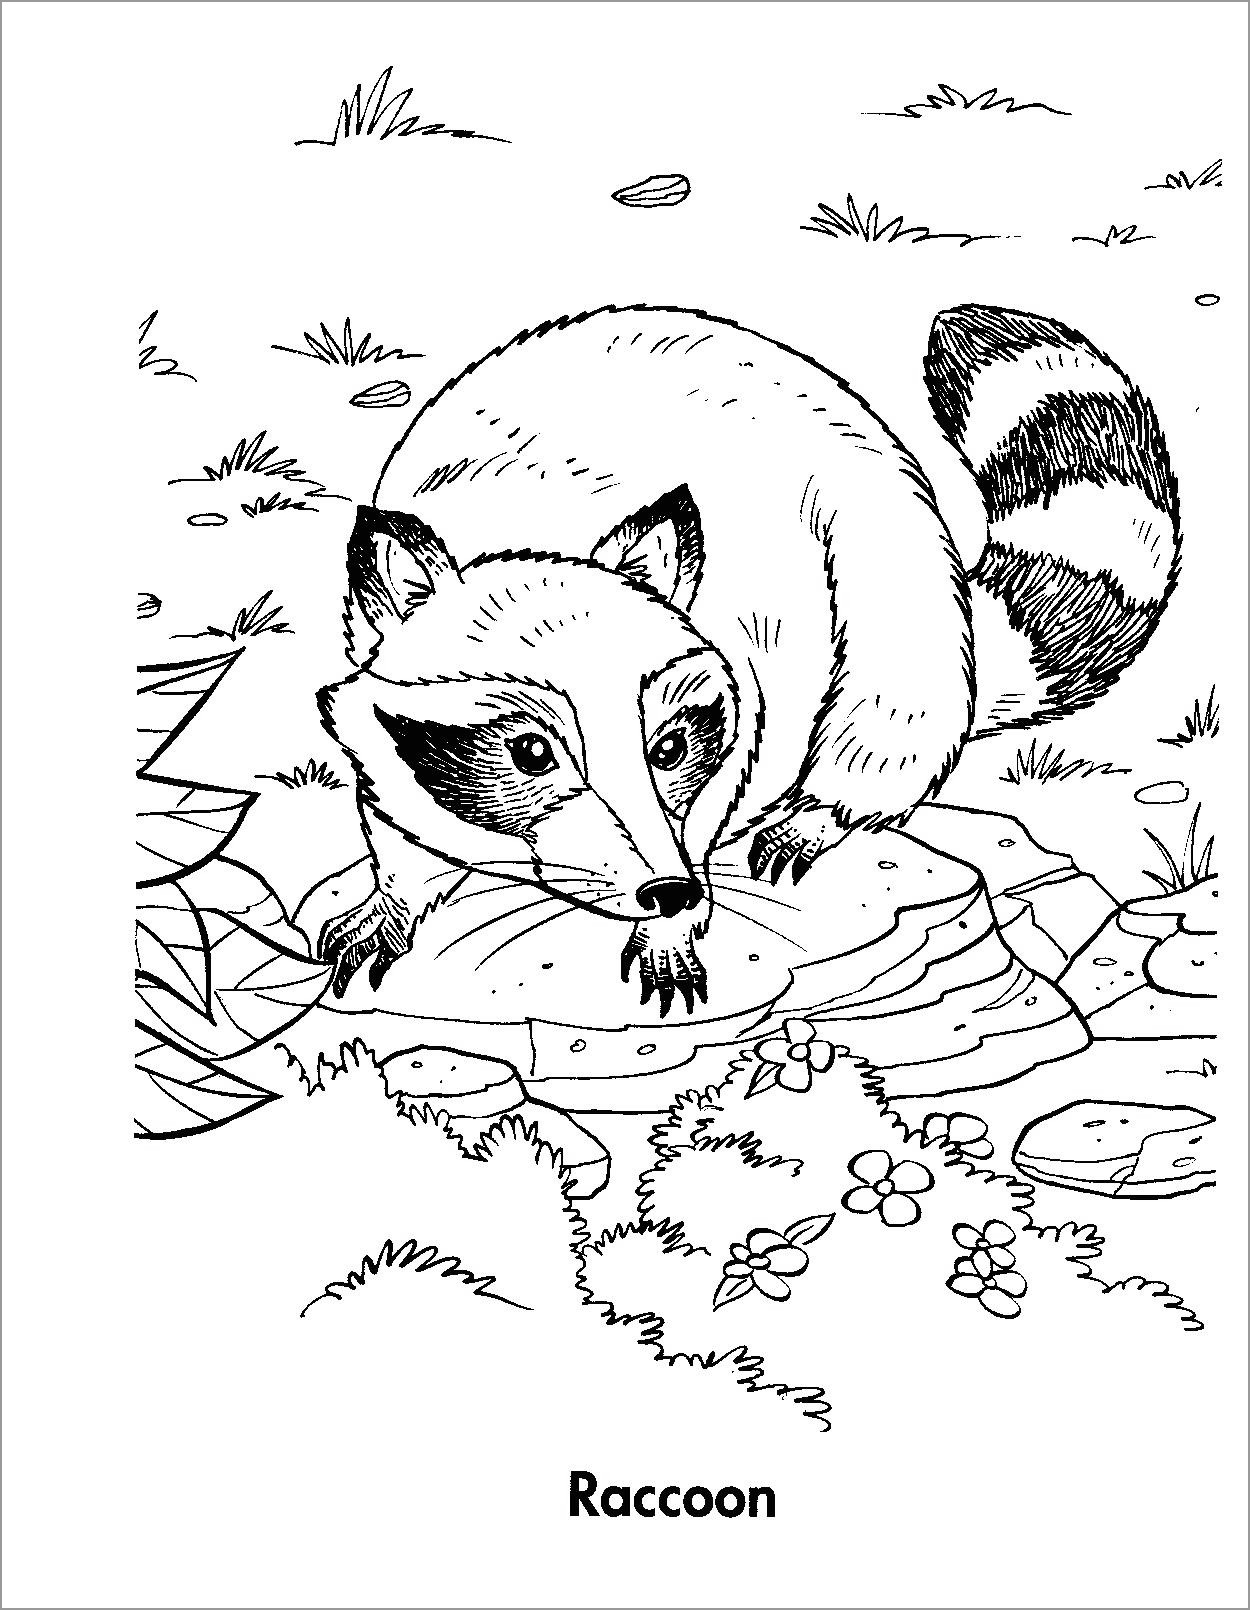 Racoon Coloring Page to Print - ColoringBay